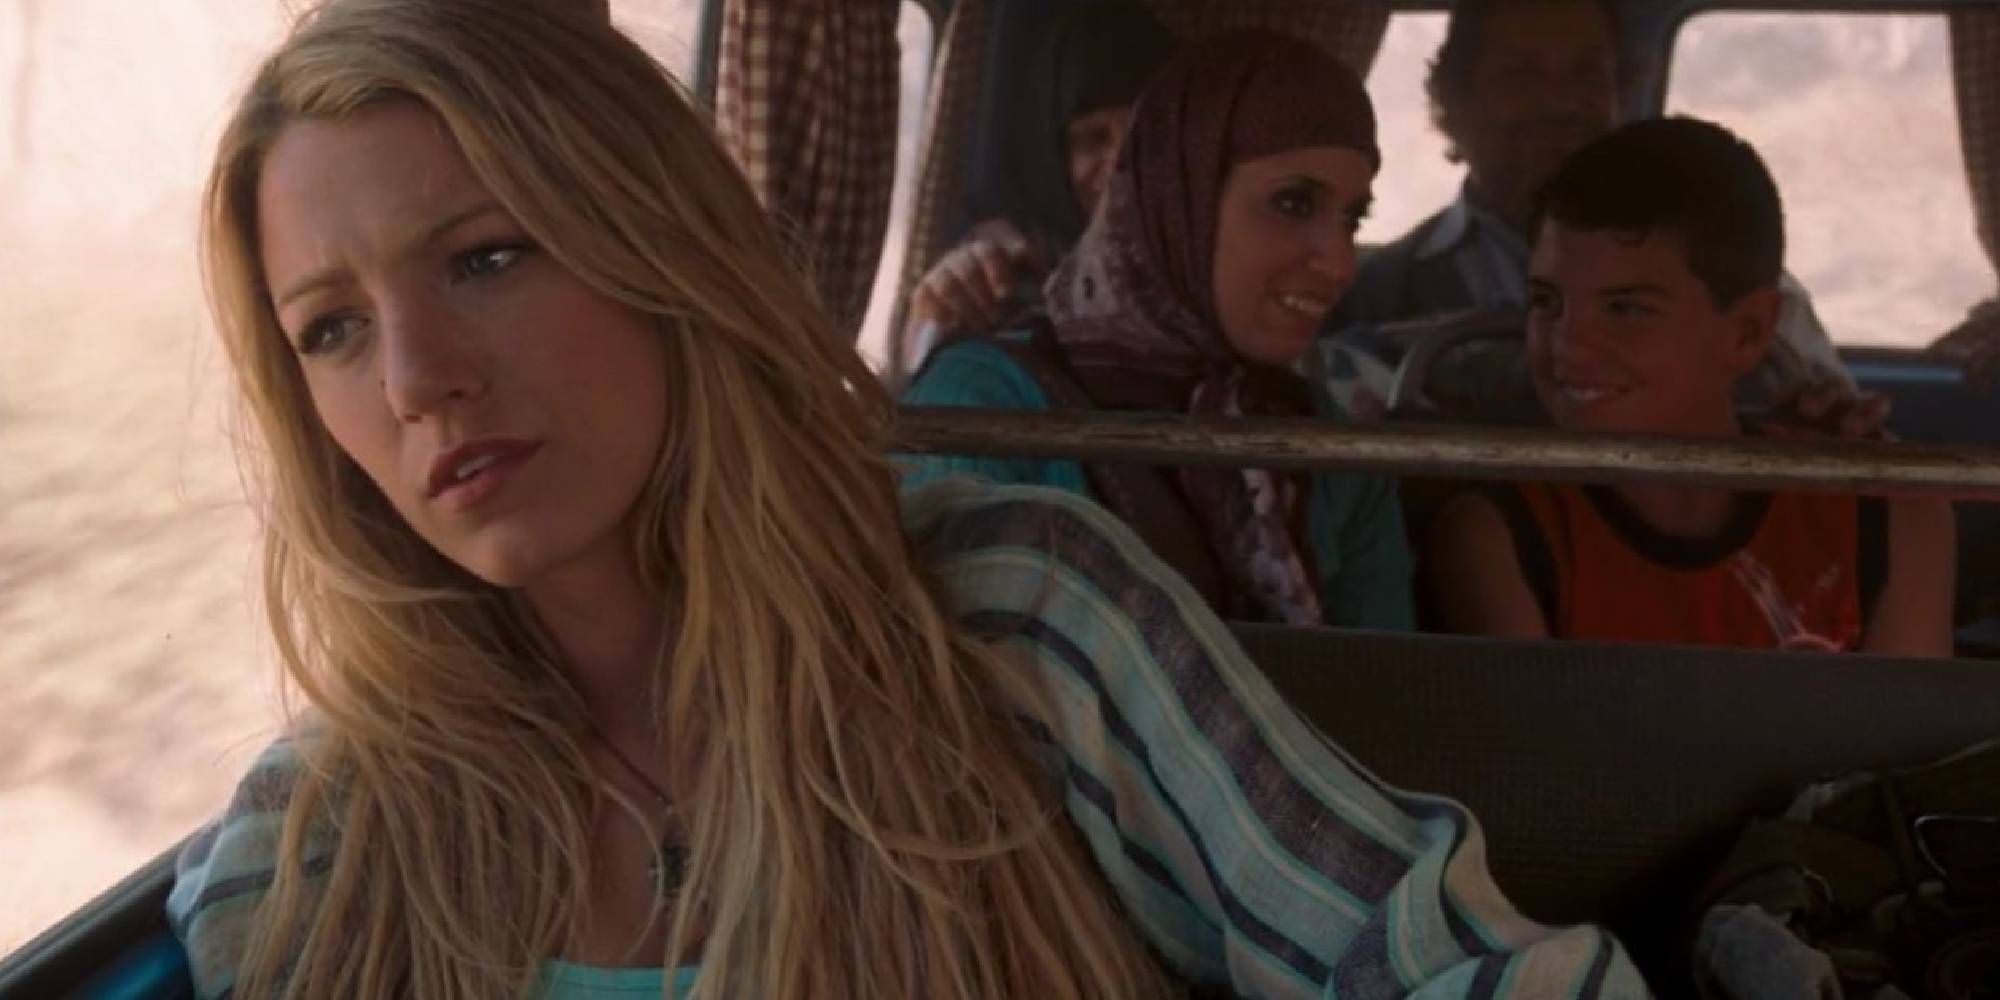 Blake Lively leaning in a bus window in The Sisterhood of the Traveling Pants 2